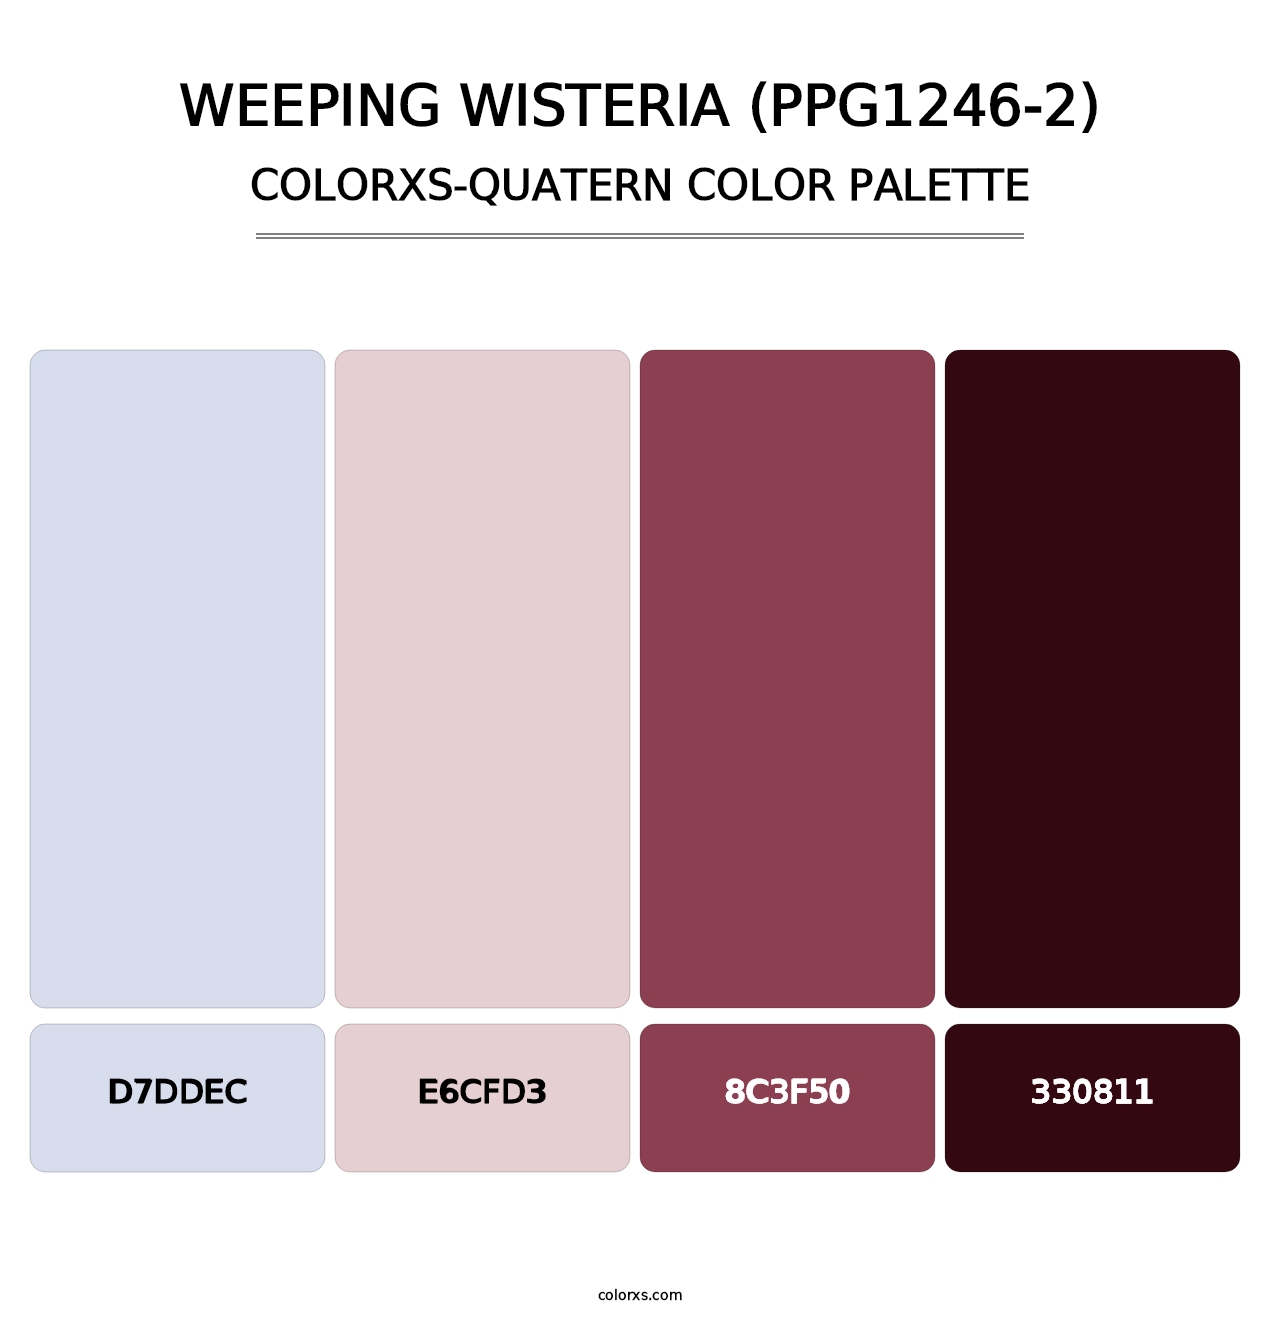 Weeping Wisteria (PPG1246-2) - Colorxs Quatern Palette